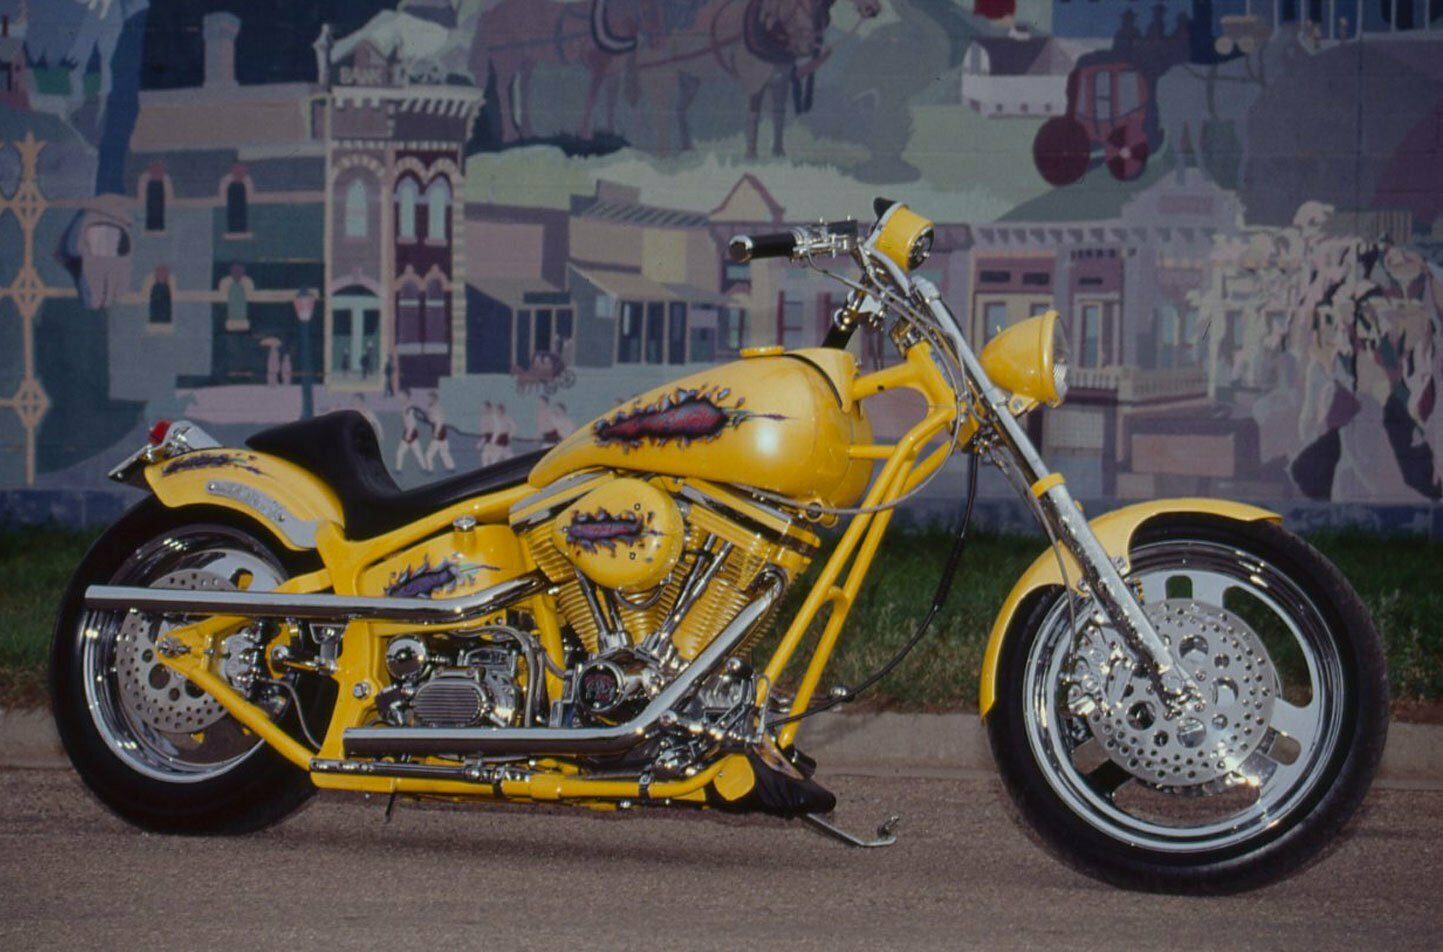 Dave and Don Perewitz worked their magic on the chrome yellow pearl paint of this ’93 Softail.